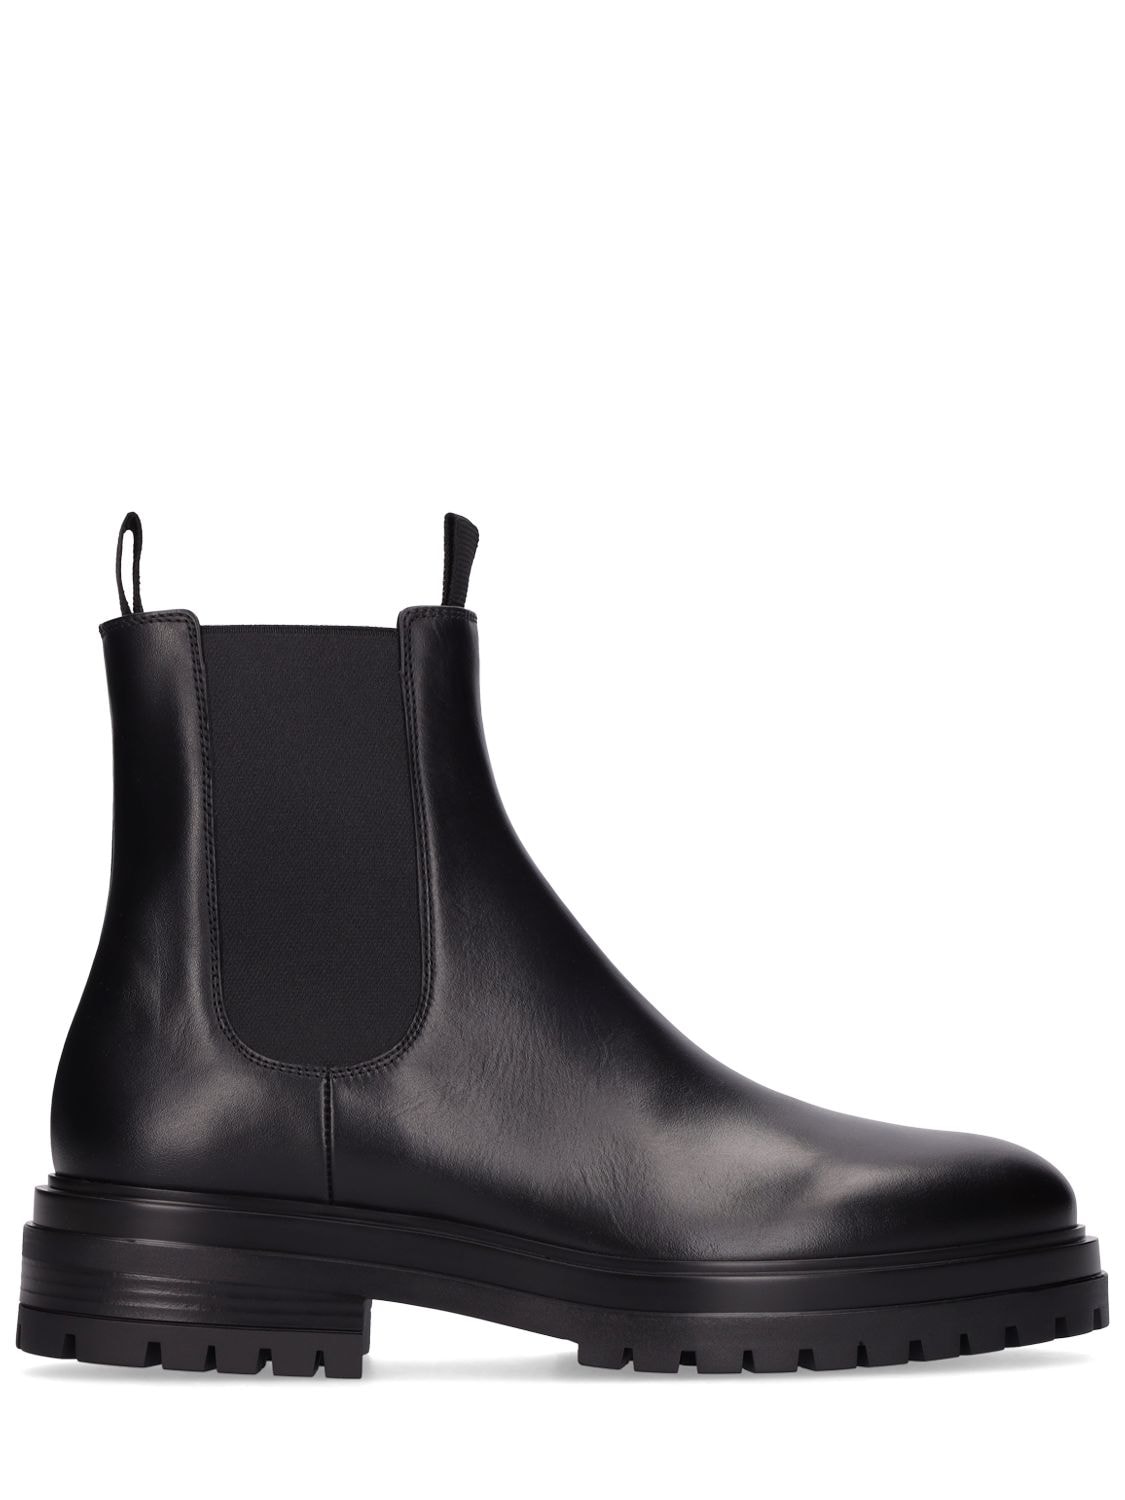 GIANVITO ROSSI CHESTER LEATHER CHELSEA BOOTS